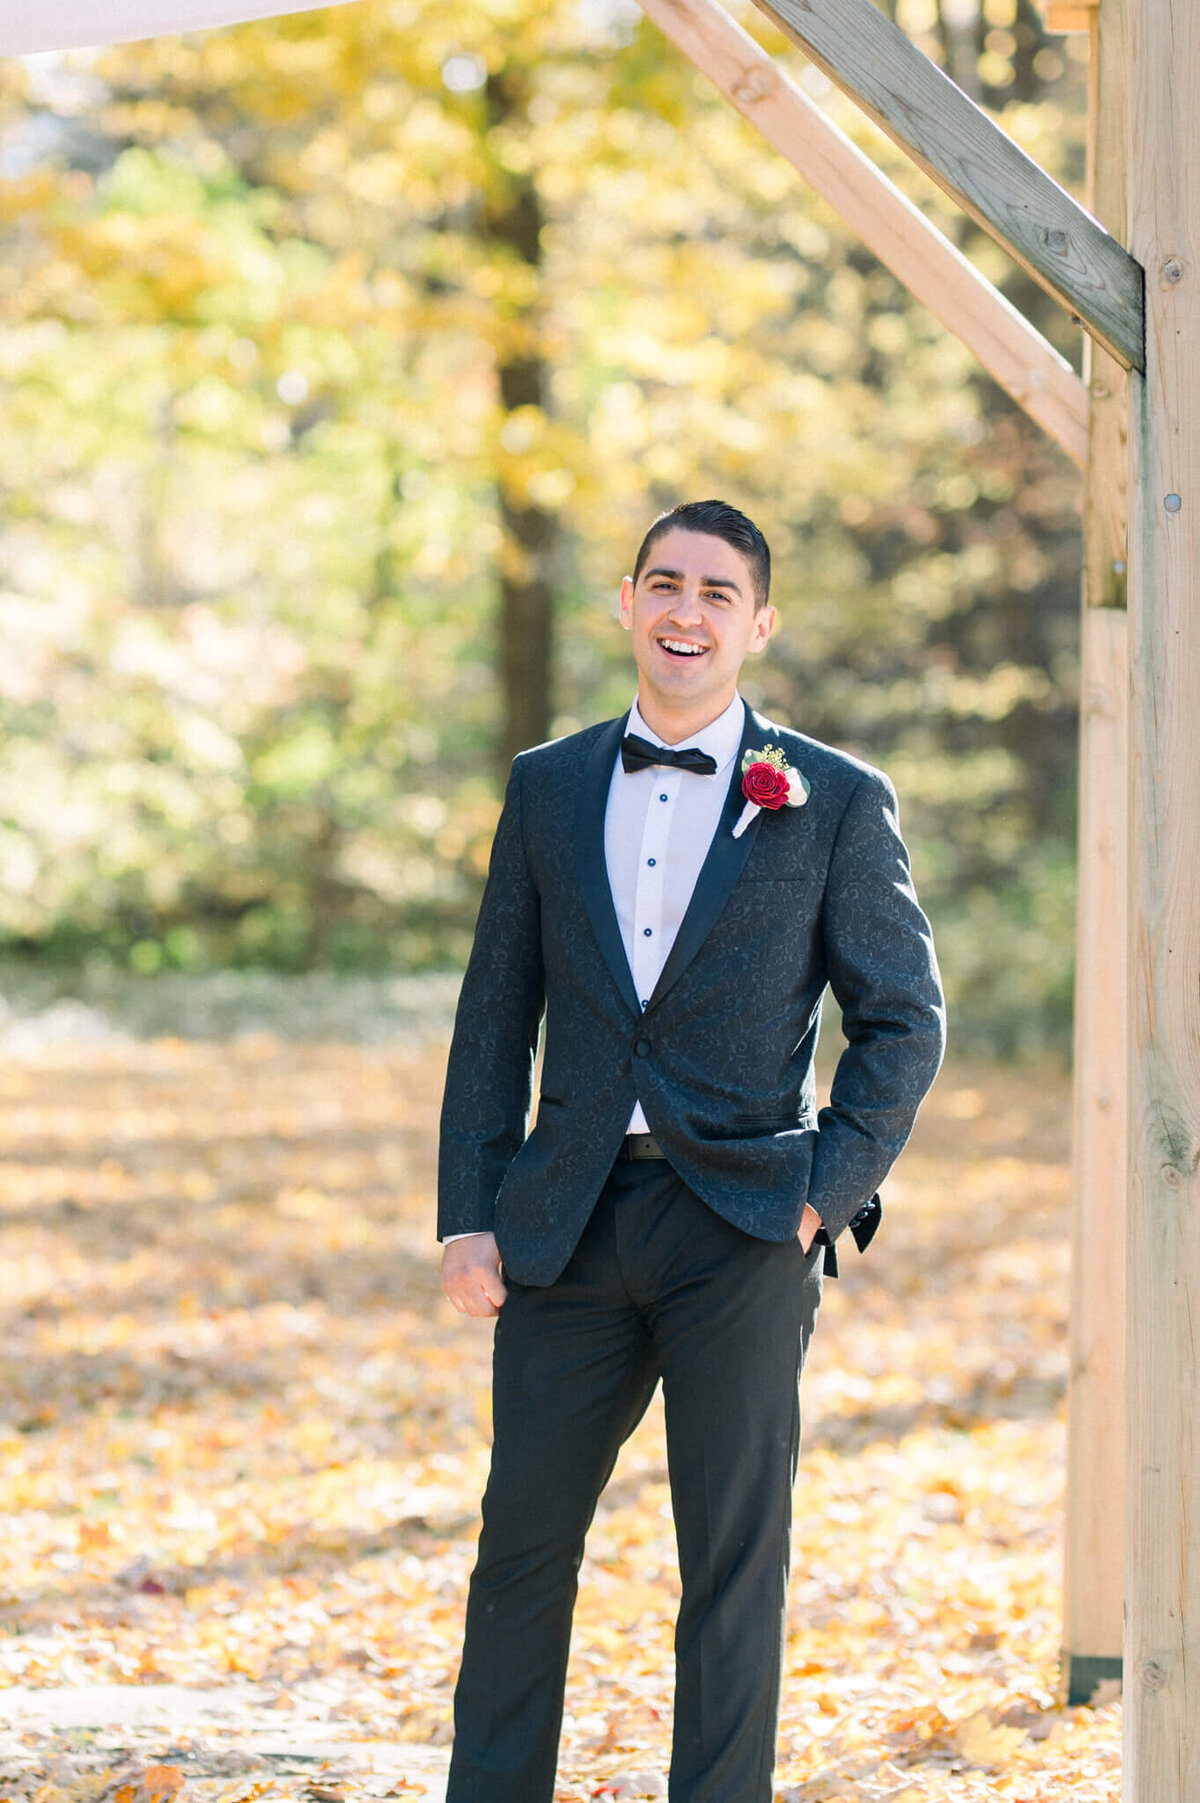 Groom spots his bride for the first time. Captured by Niagara wedding photographer Kristine Marie Photography